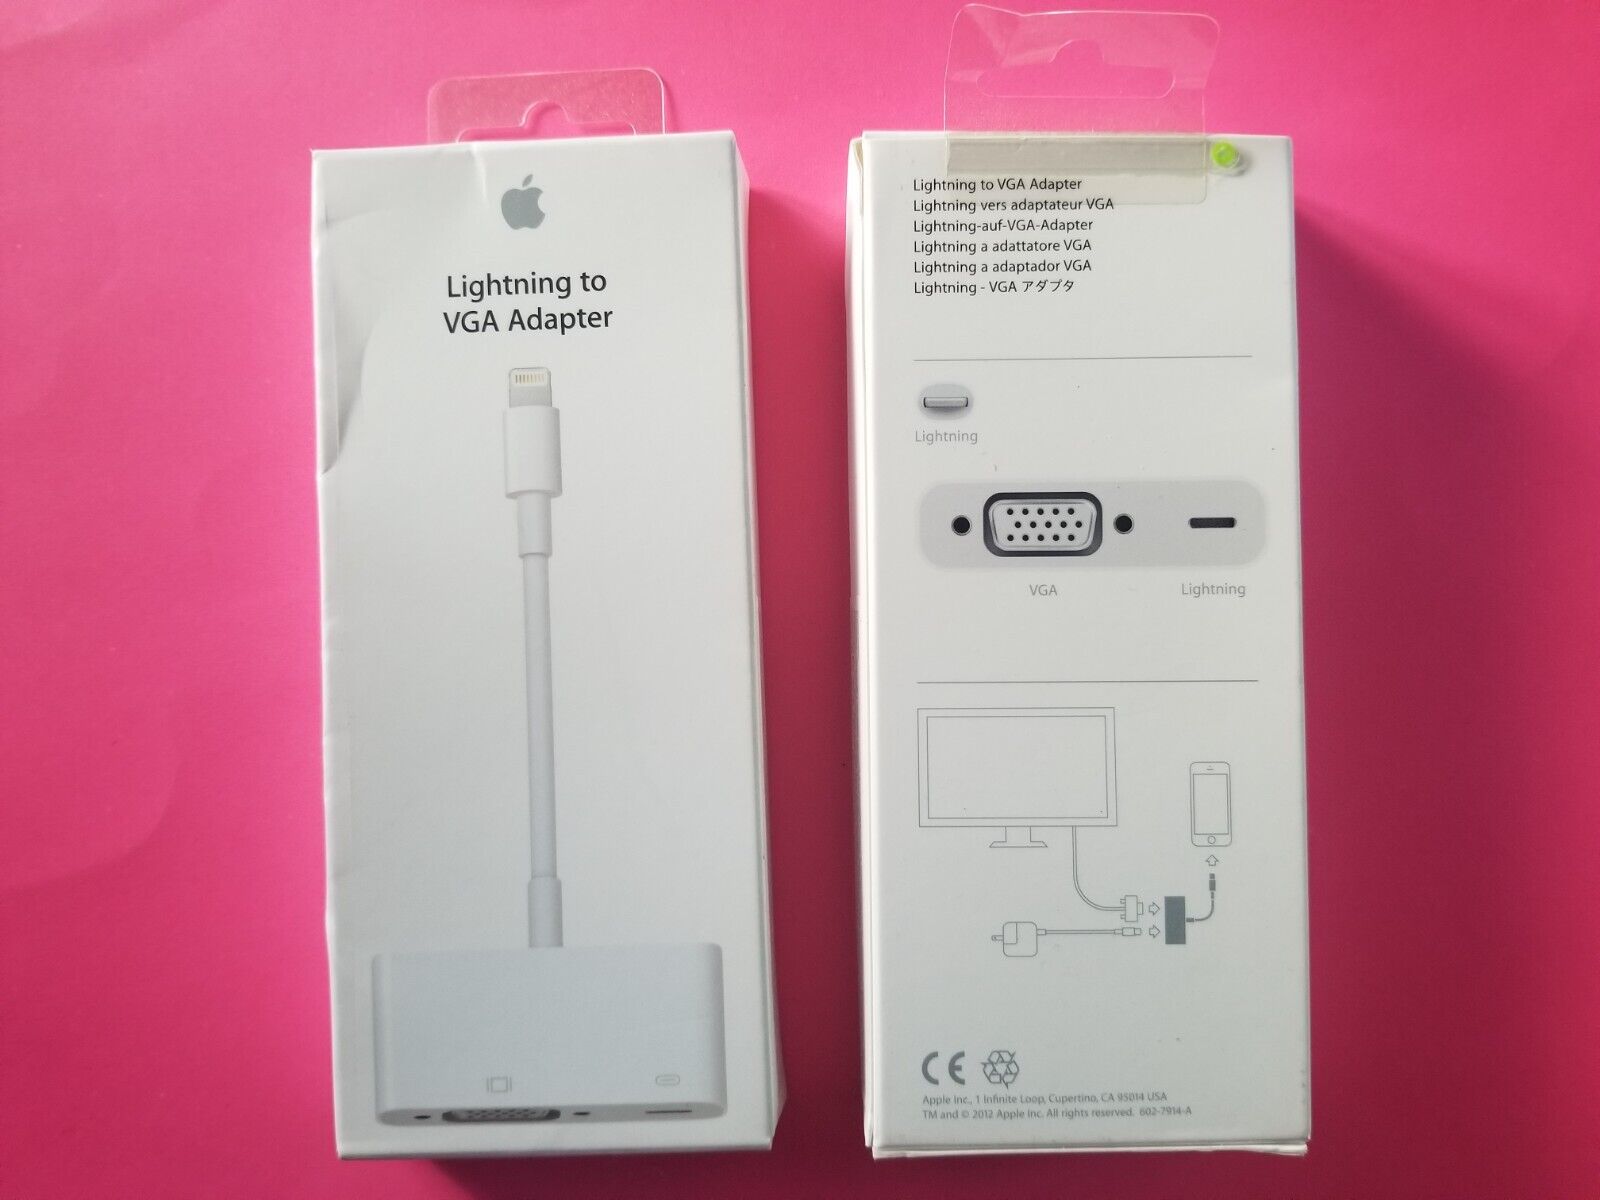 NEW - Genuine Apple Lightning to VGA Adapter for iPad/iPhone/iPod (MD825AM/A)